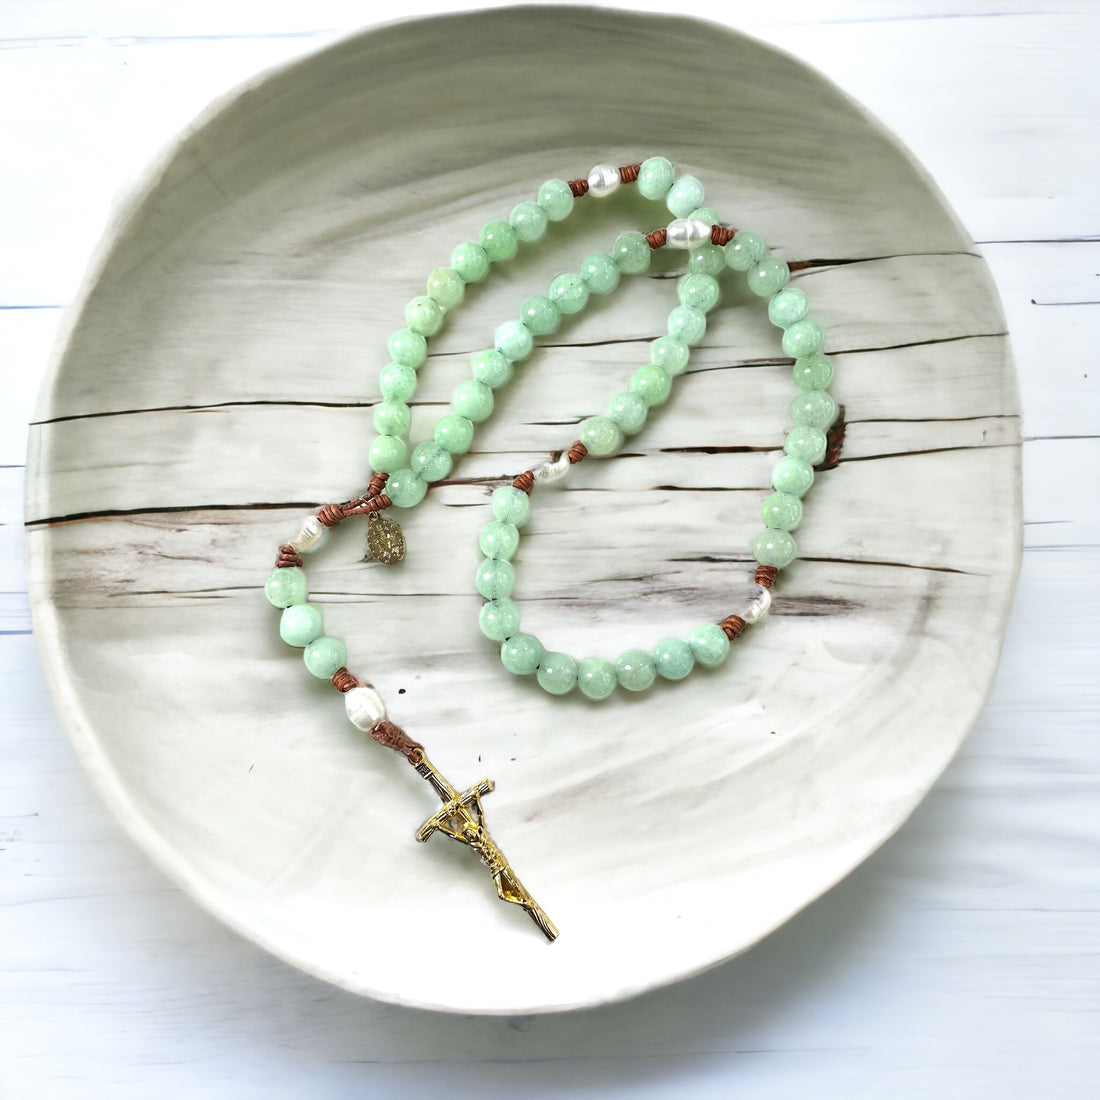 Handmade rosary, green rosary, gemstone rosary, catholic rosary, catholic rosaries, handmade rosaries, rosary gift, catholic gifts, catholic gift, christian gifts, catholic gifts for her, miraculous medal rosary, miraculous medal, prayer tools